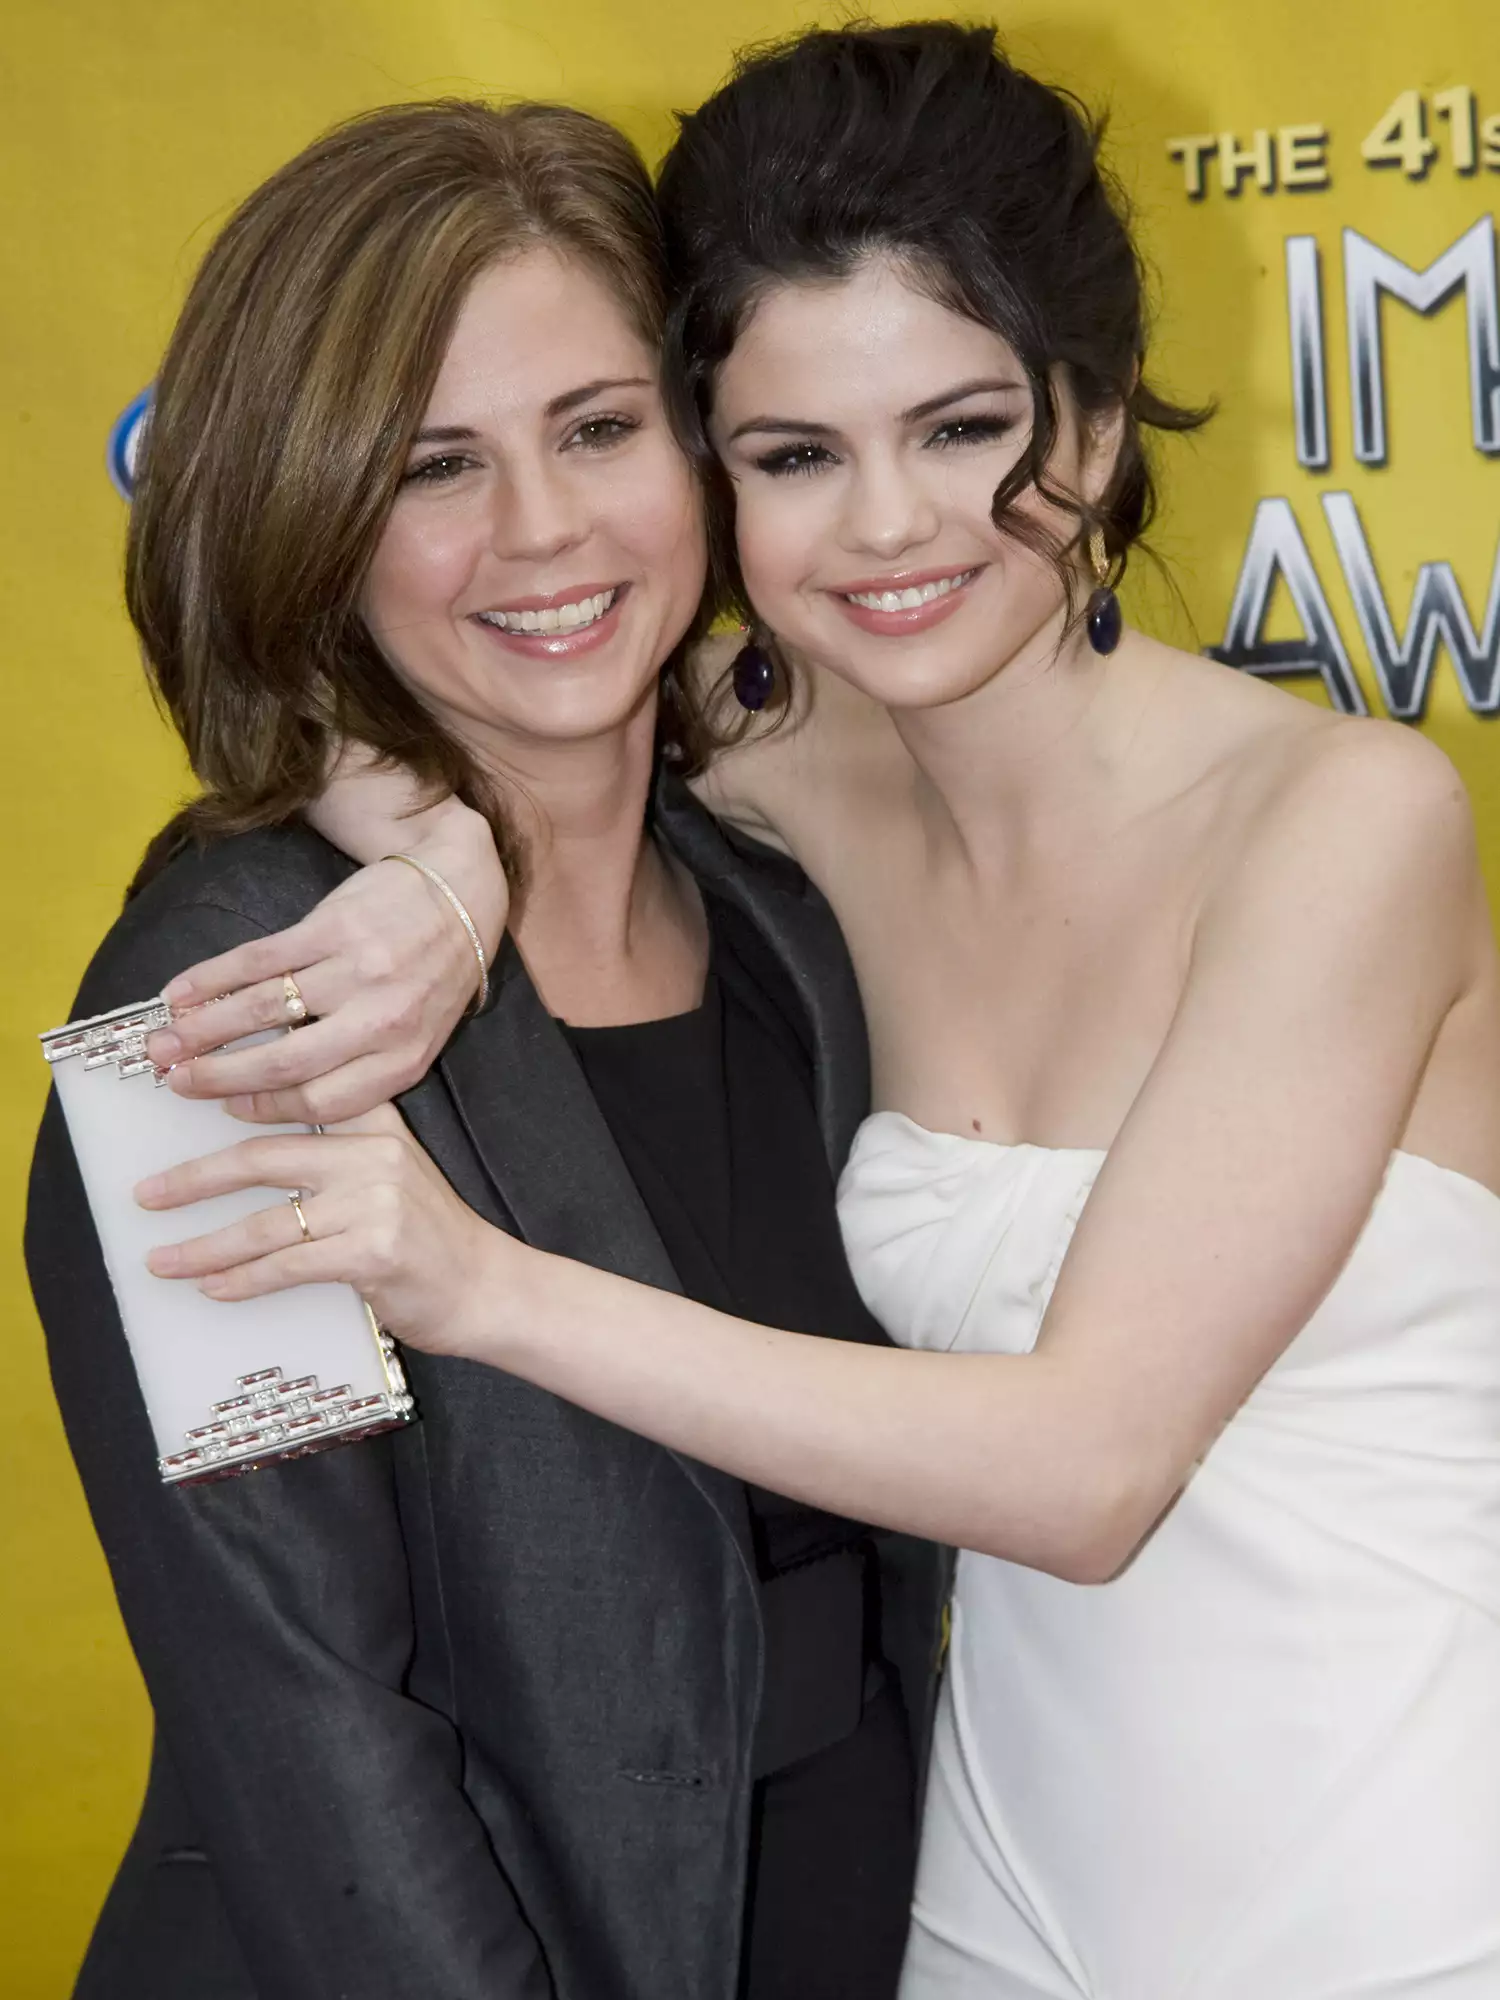 Selena Gomez and mother (left) arrives at The Shrine Auditorium on February 26, 2010